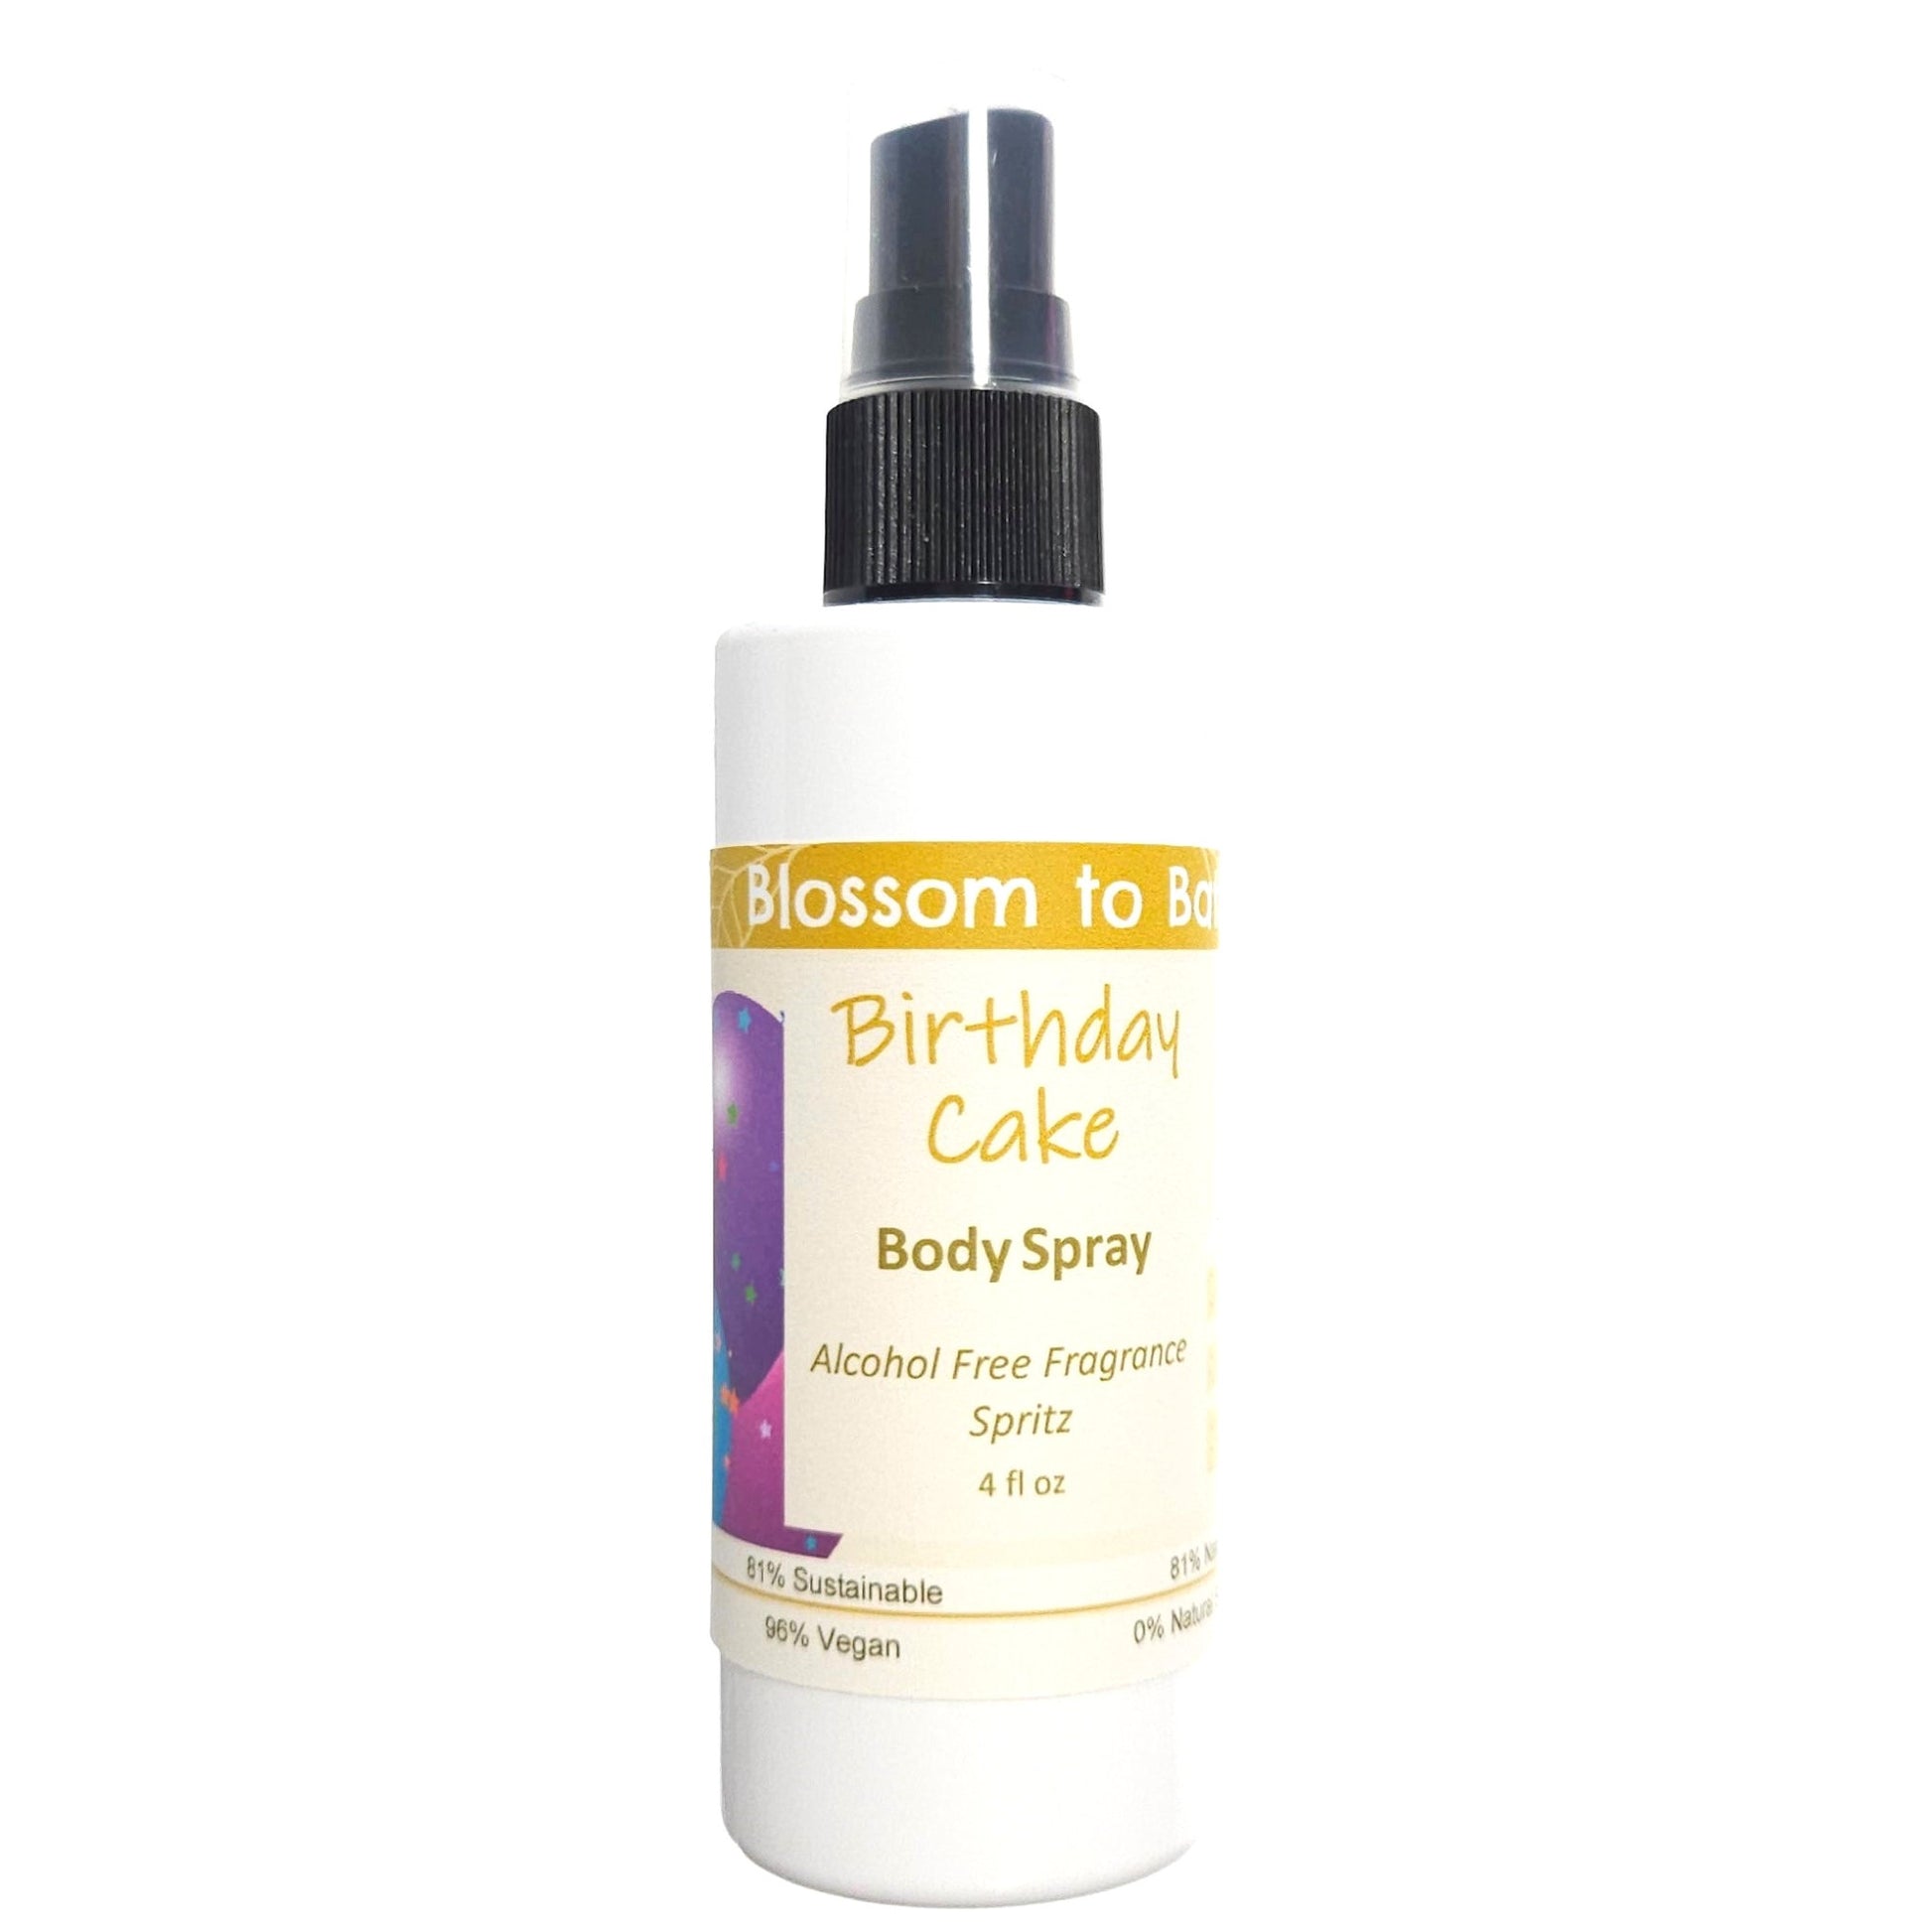 Buy Blossom to Bath Birthday Cake Body Spray from Flowersong Soap Studio.  Natural  freshening of skin, linens, or air  The essence of a vanilla buttercream frosted birthday cake.